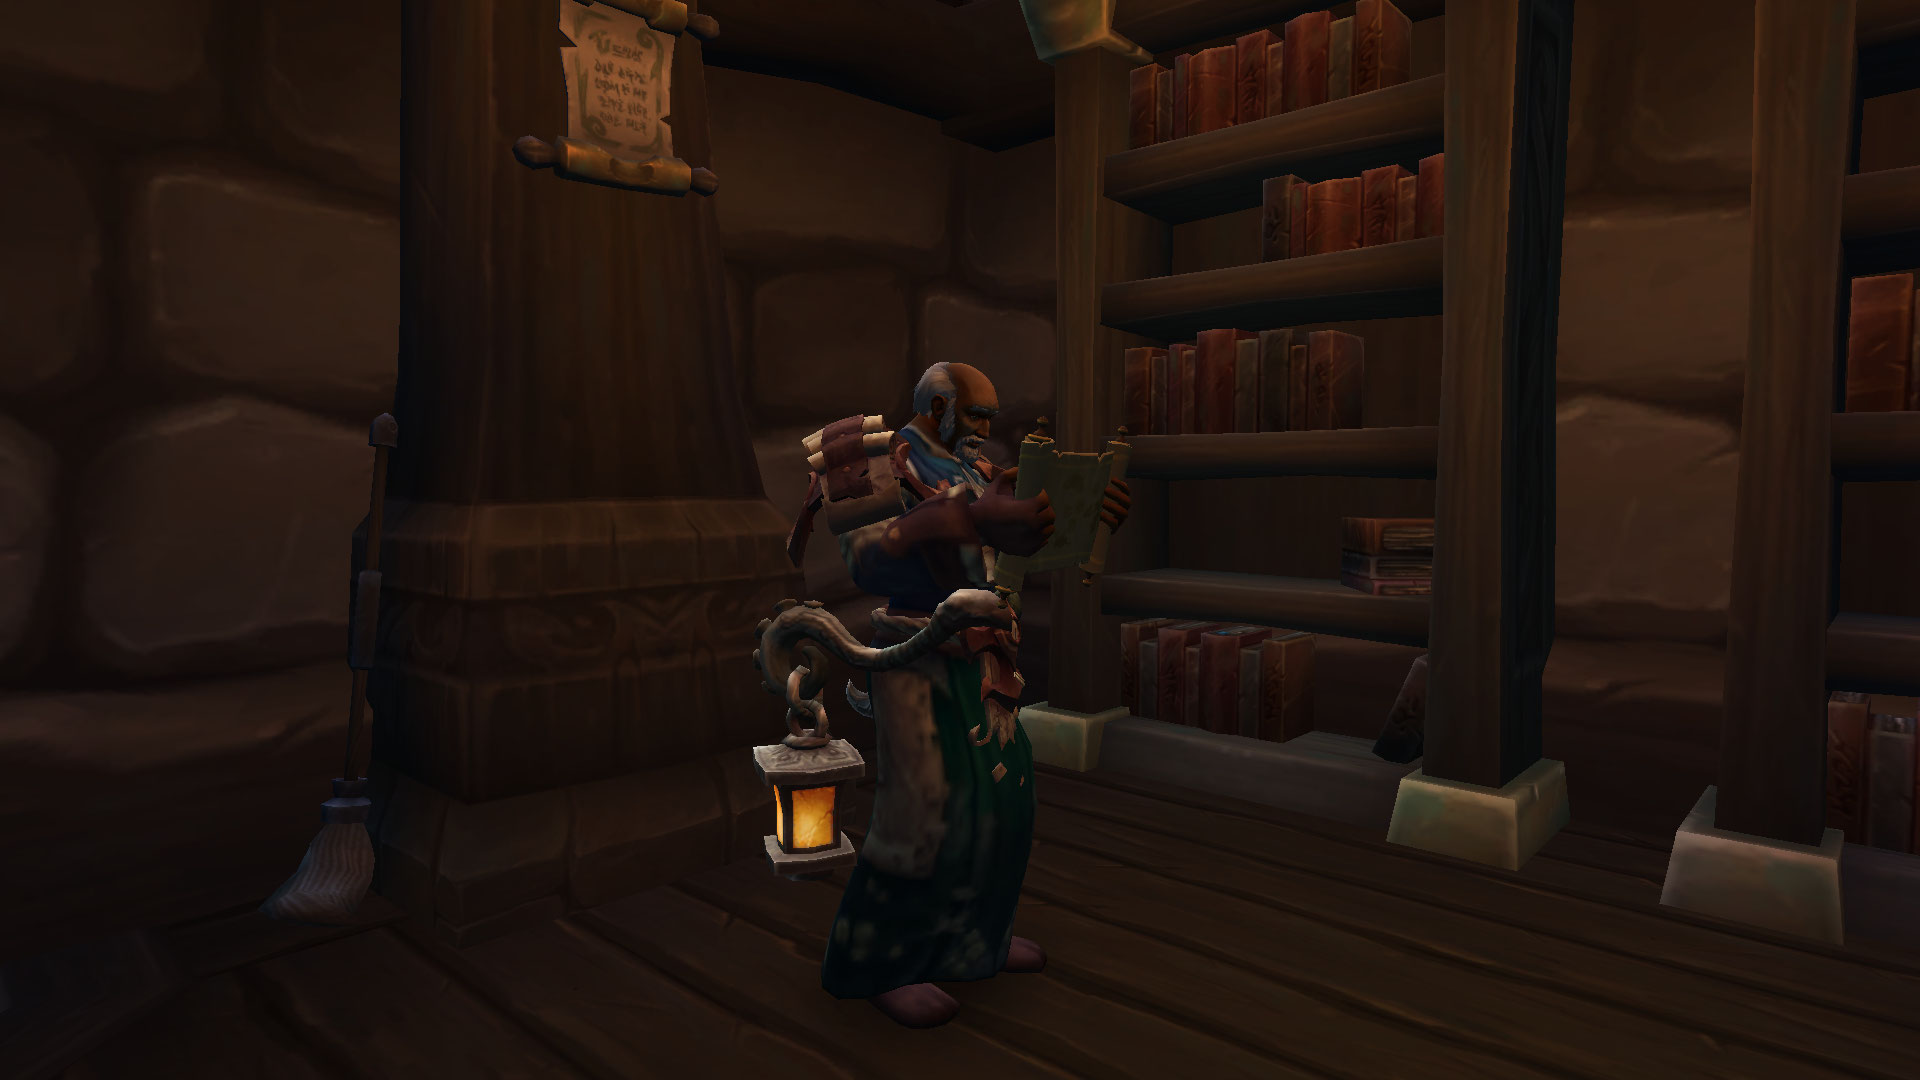 The Art Of Roleplaying: Immersive Storytelling In World Of Warcraft